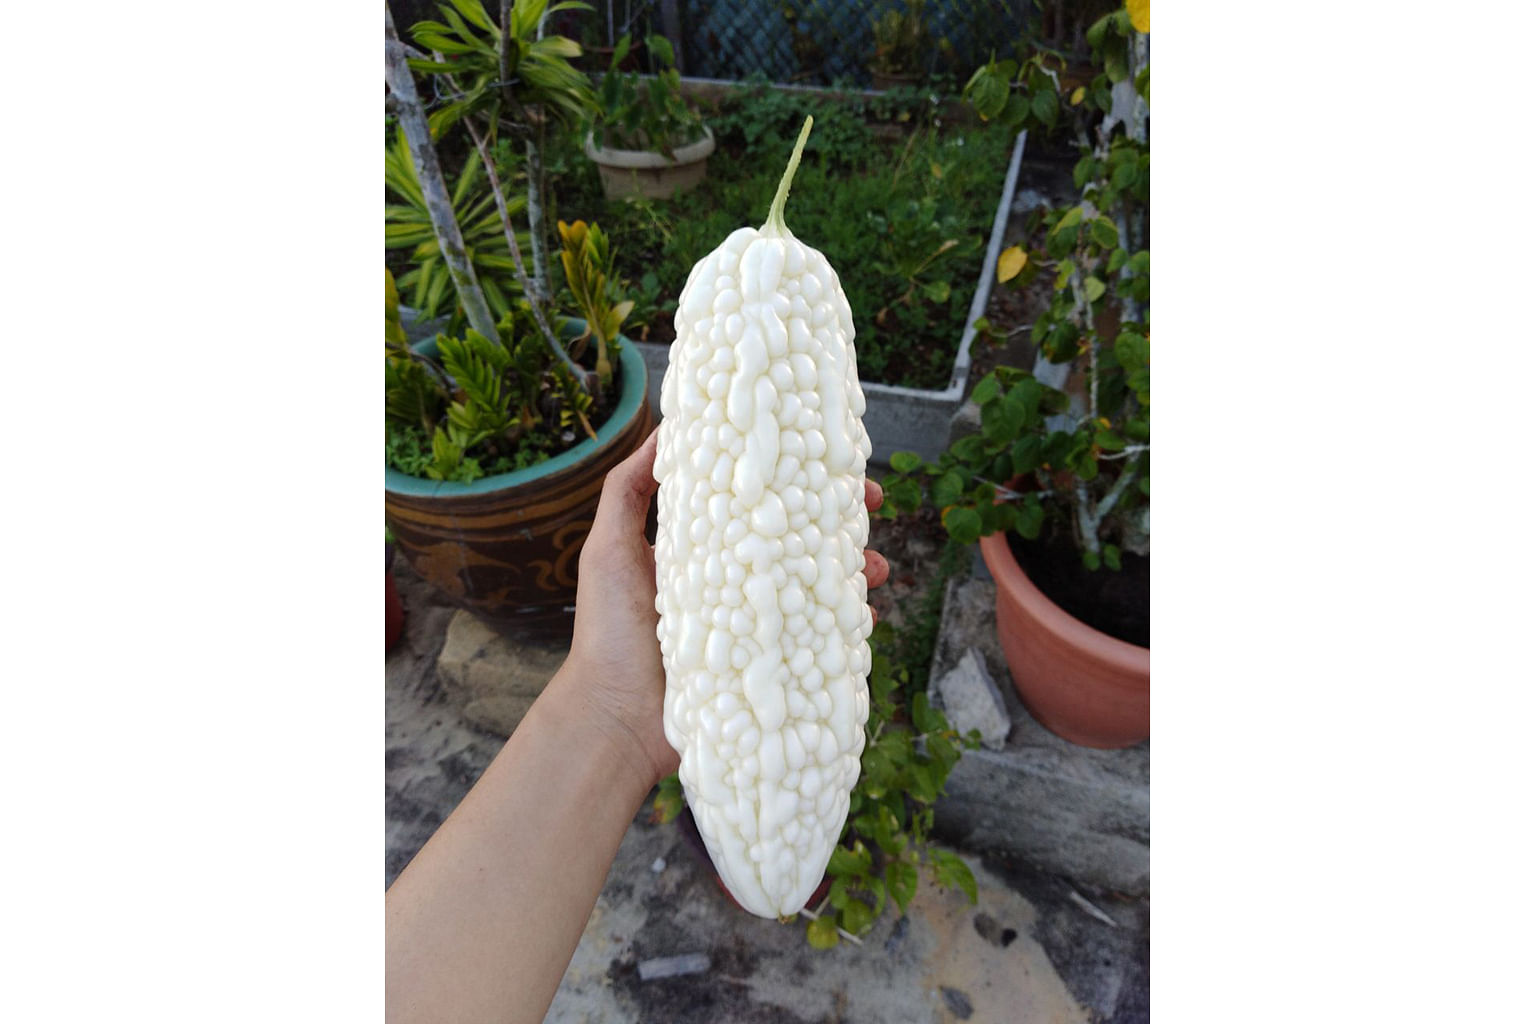 The produce at Pacific Agro Farm includes white bittergourd.